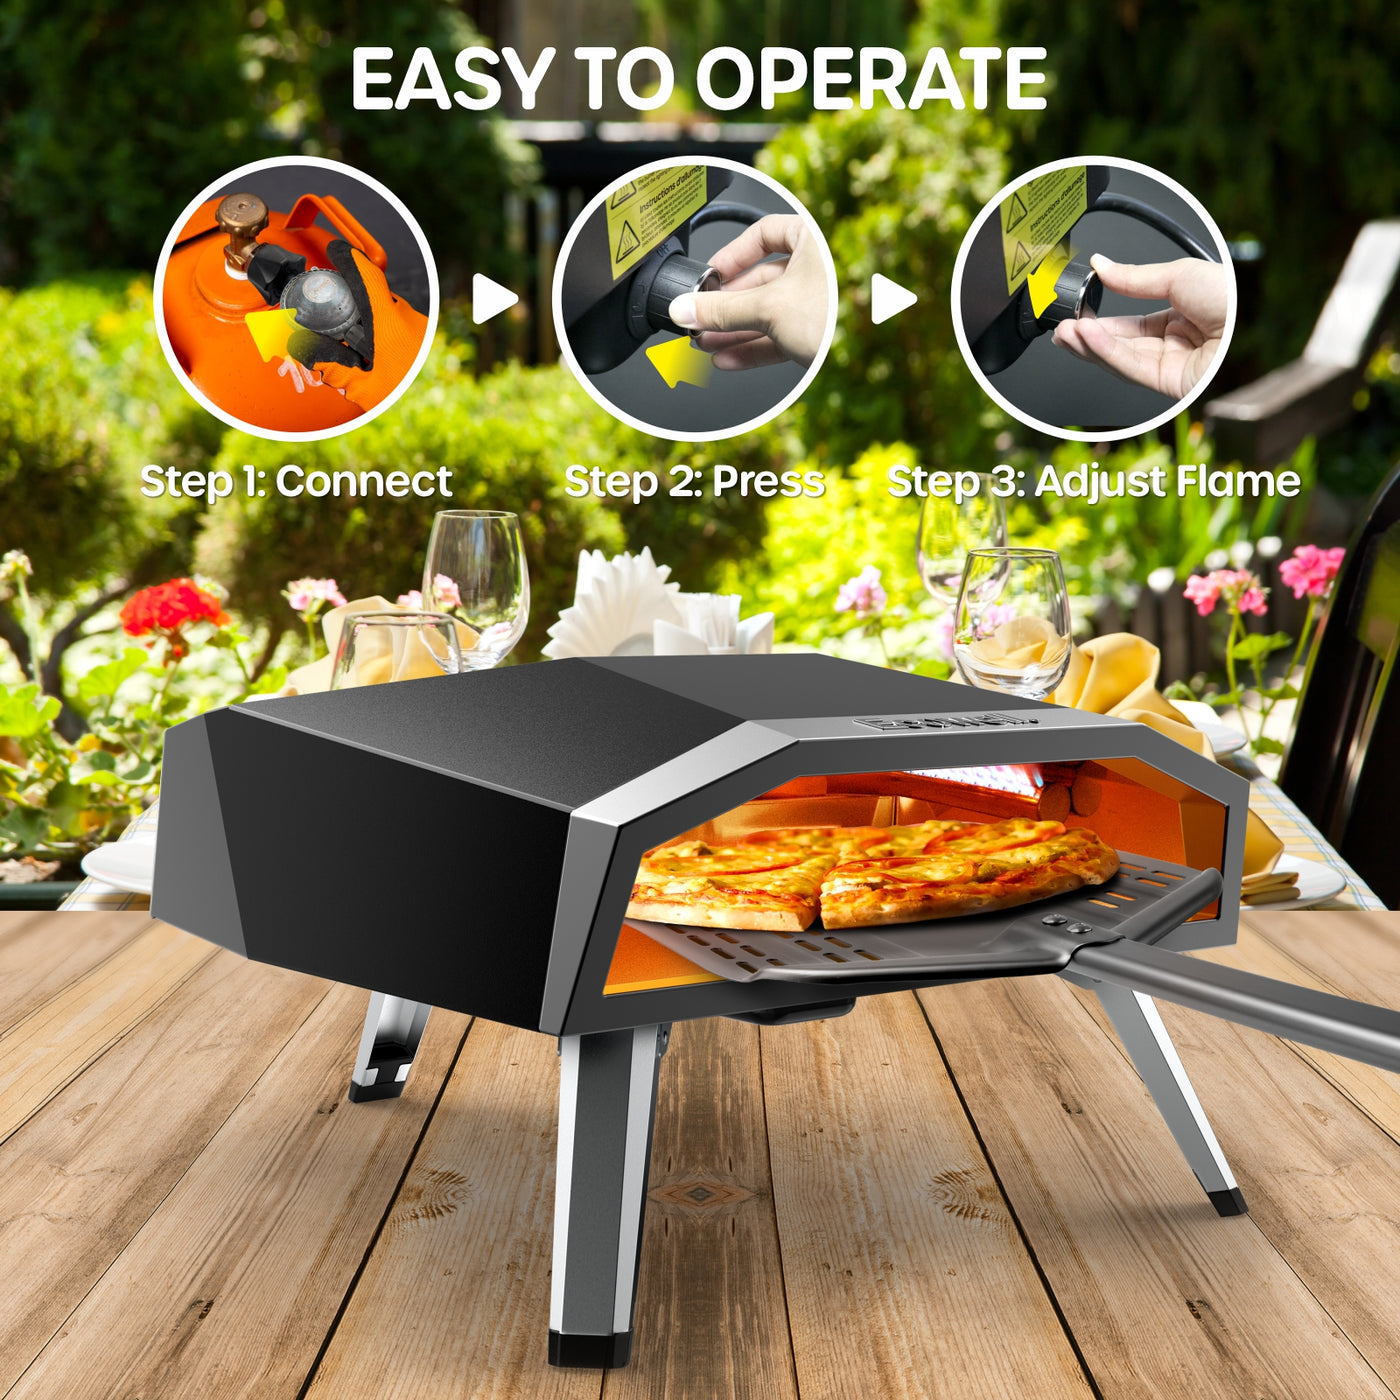 ECOWELL 16” Gas Outdoor Pizza Oven